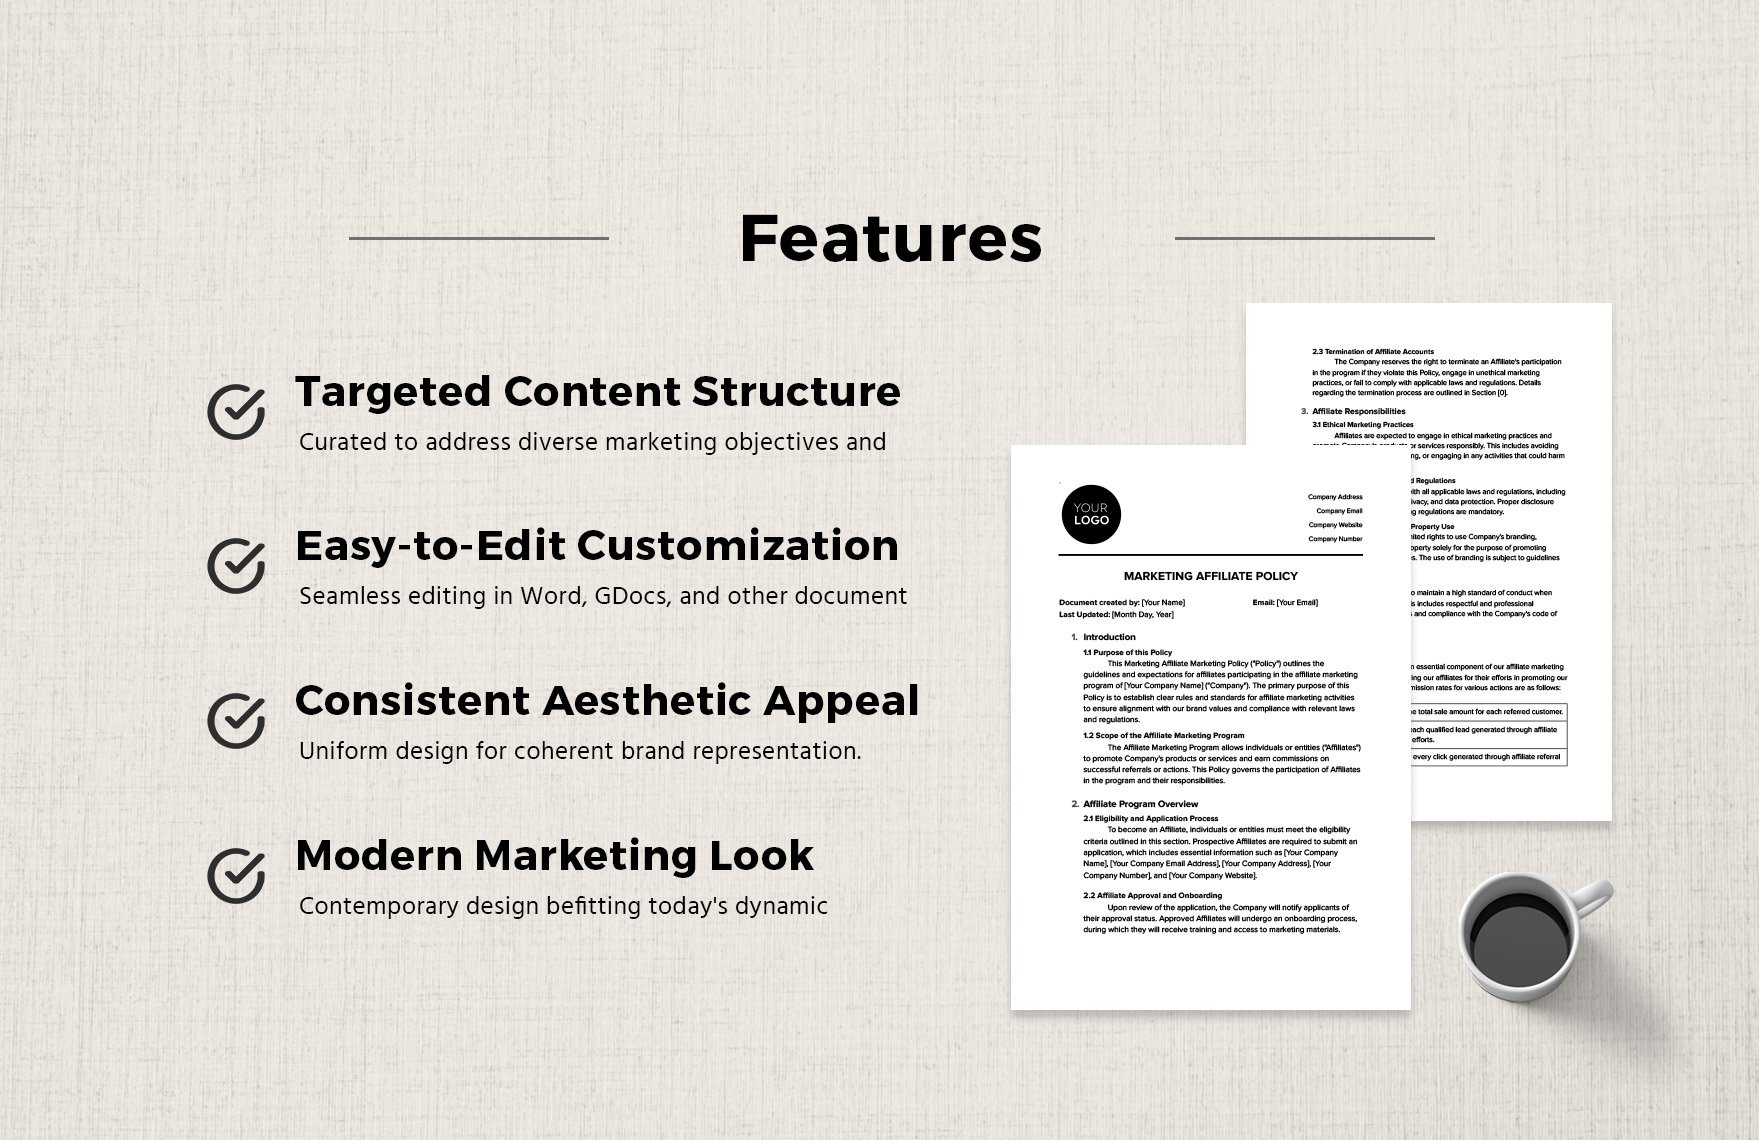 Marketing Affiliate Policy Template